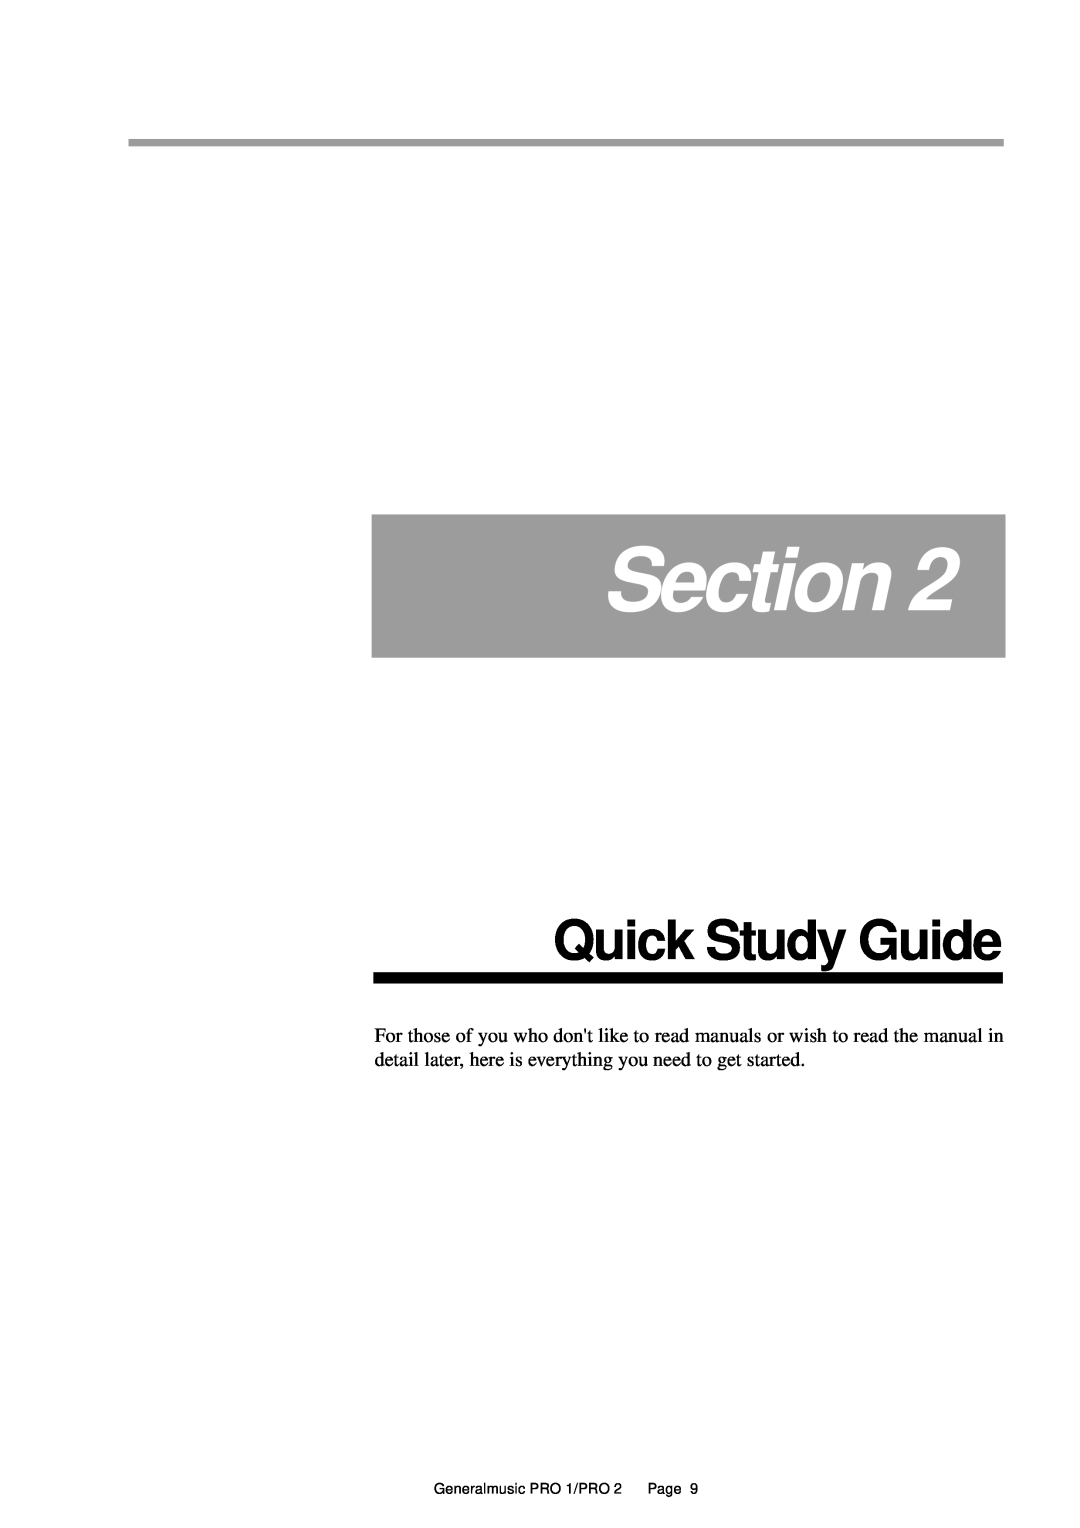 Peavey Pro 2, Pro 1 owner manual Quick Study Guide, Section, Generalmusic PRO 1/PRO 2 Page 